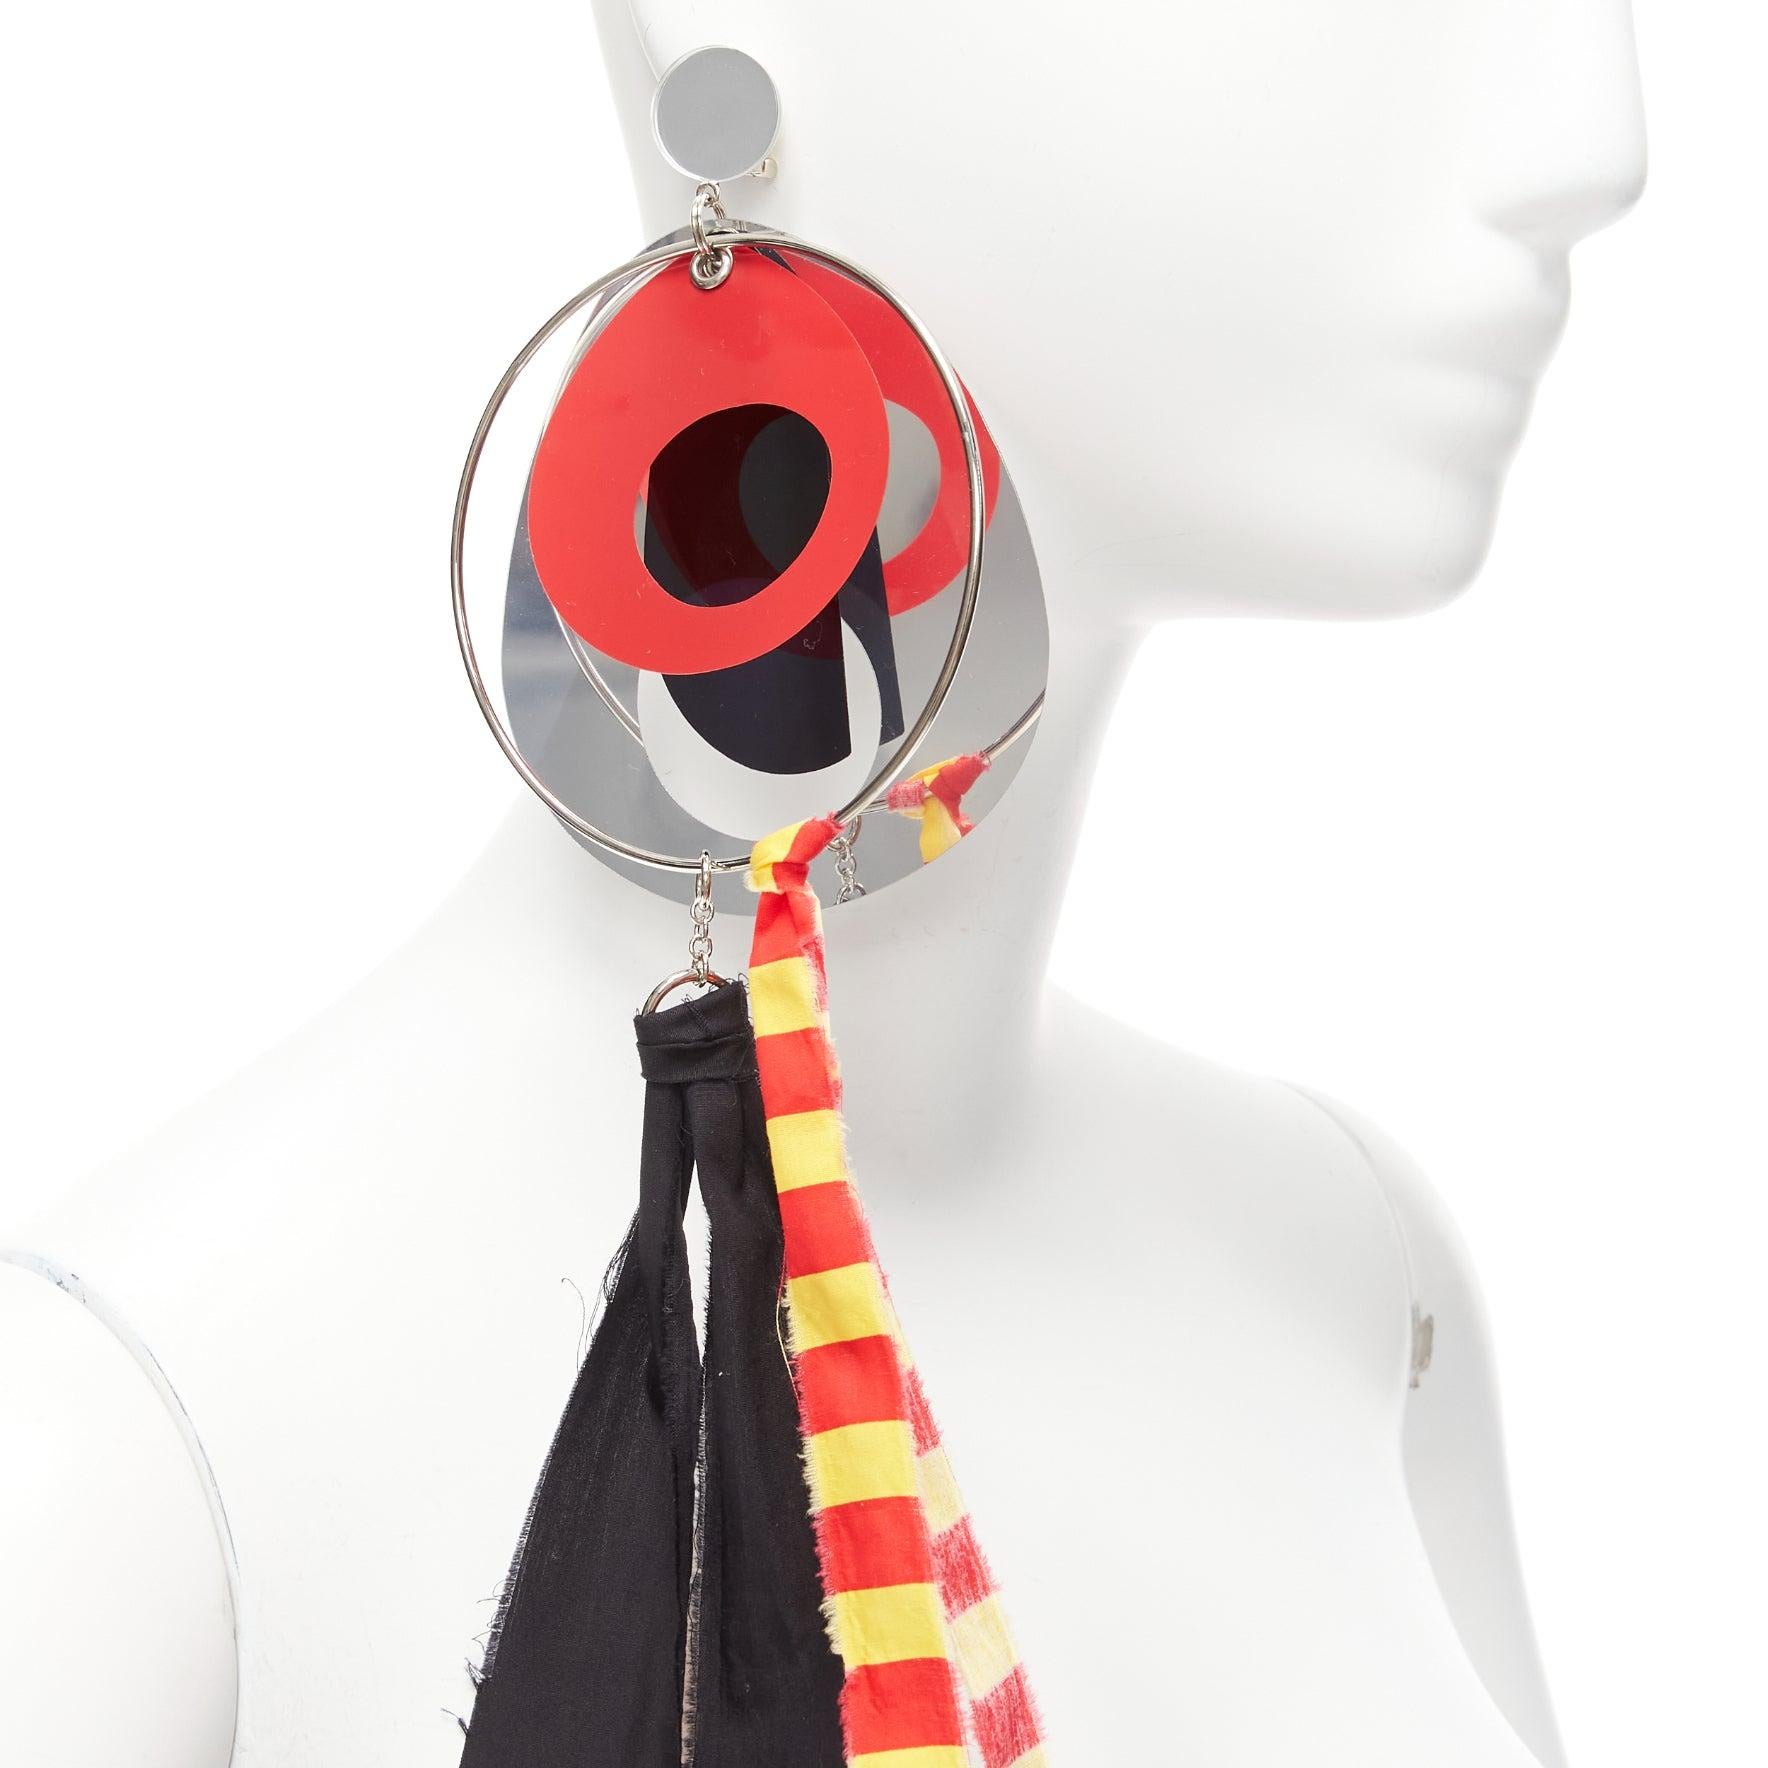 MIU MIU red silver plastic film hoop ribbon clip on statement earring Single
Reference: NKLL/A00092
Brand: Miu Miu
Designer: Miuccia Prada
Material: Plastic, Cotton
Color: Multicolour
Pattern: Solid
Closure: Clip On
Extra Details: Cliip on earring.